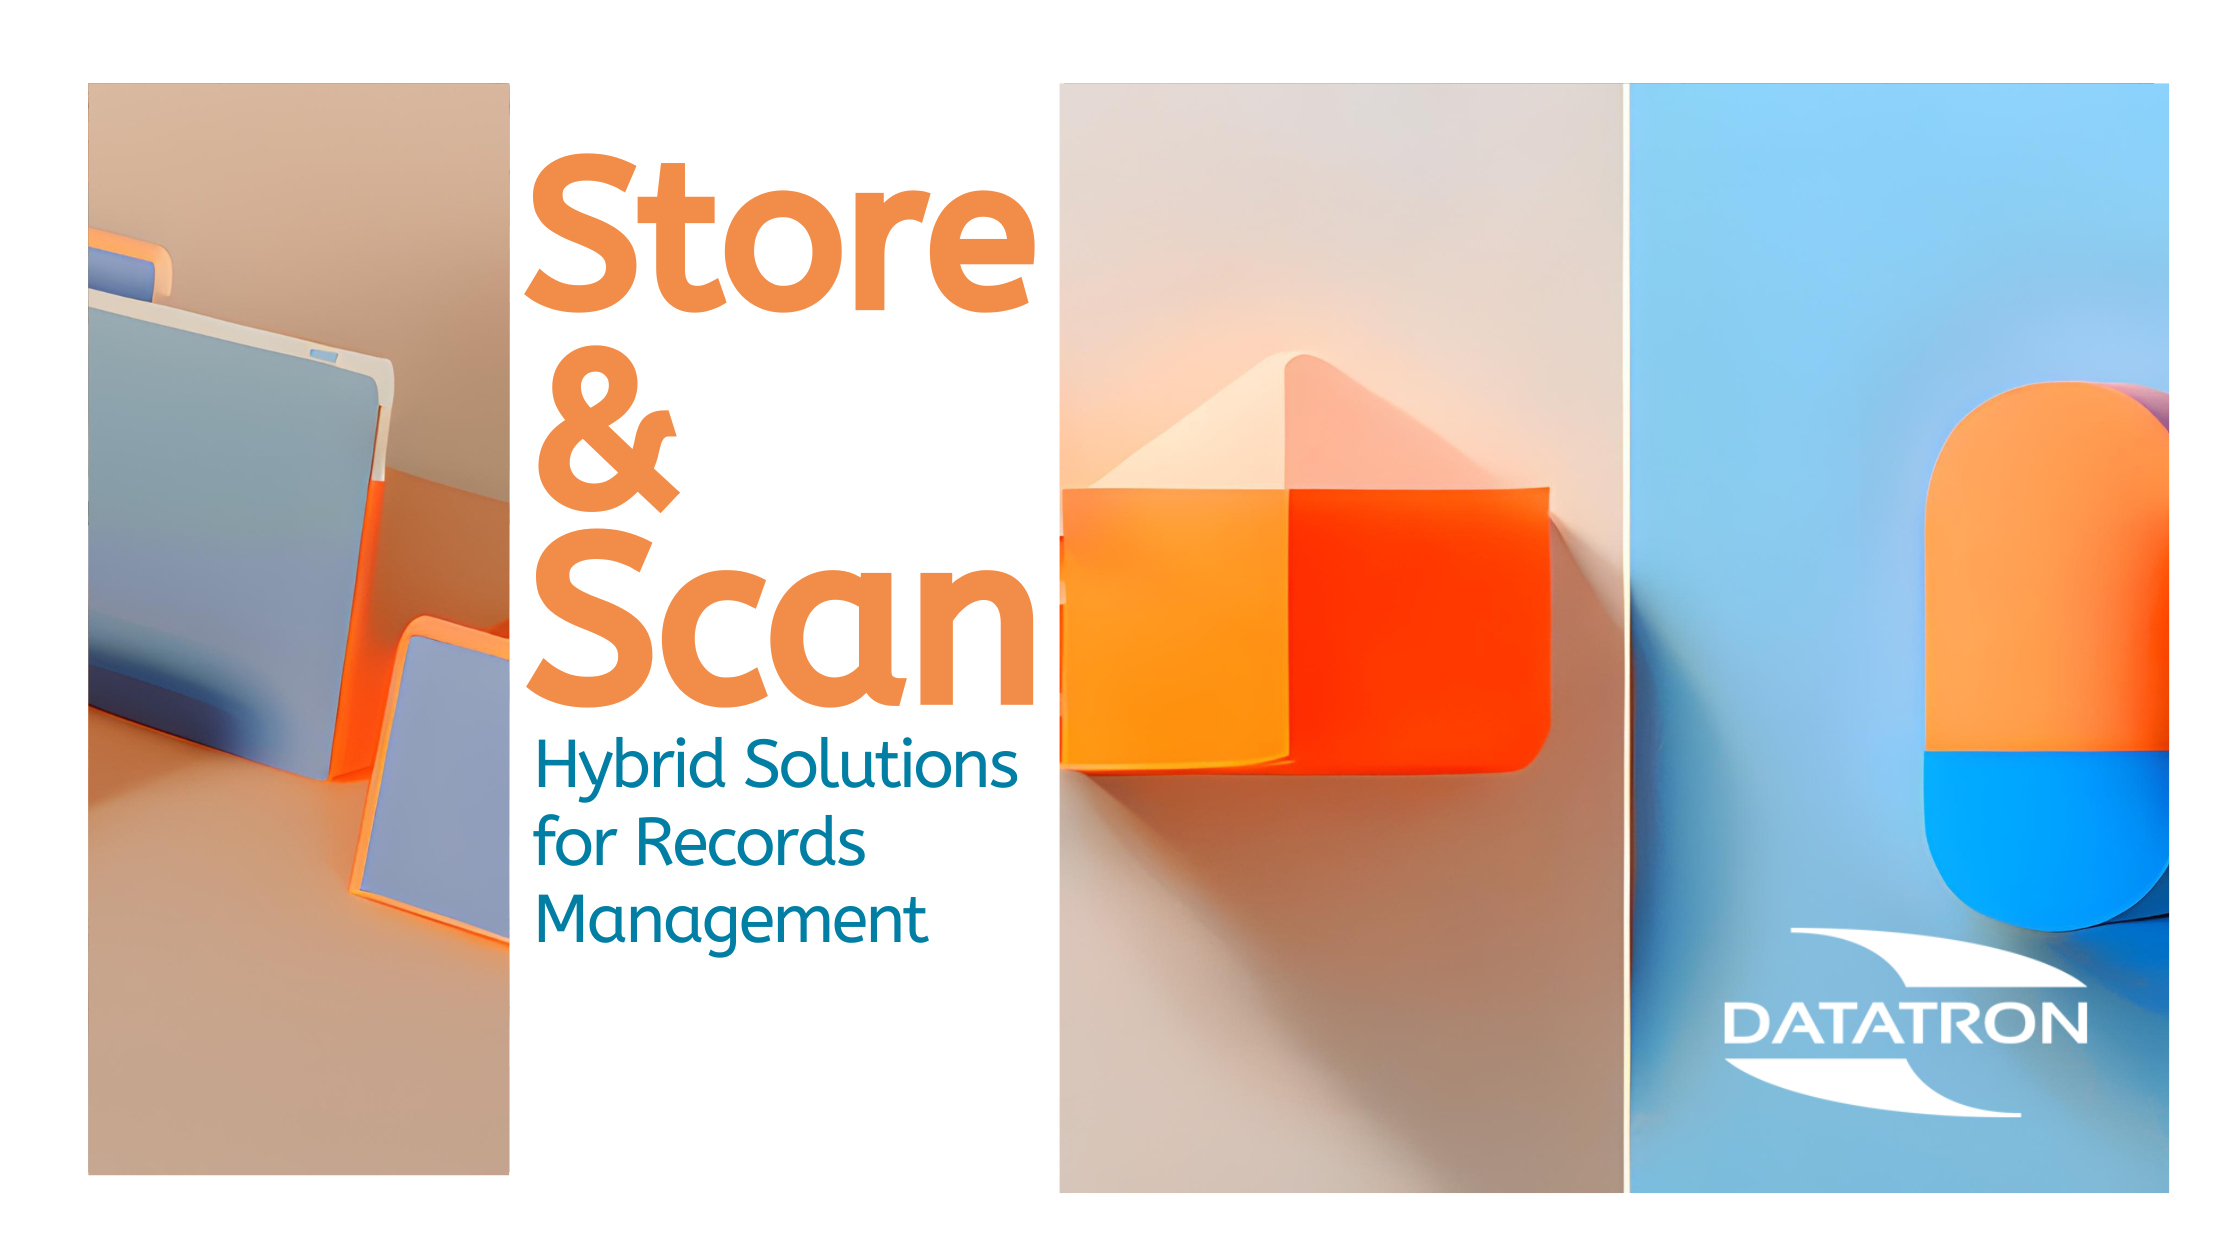 Document Storage and scanning solutions